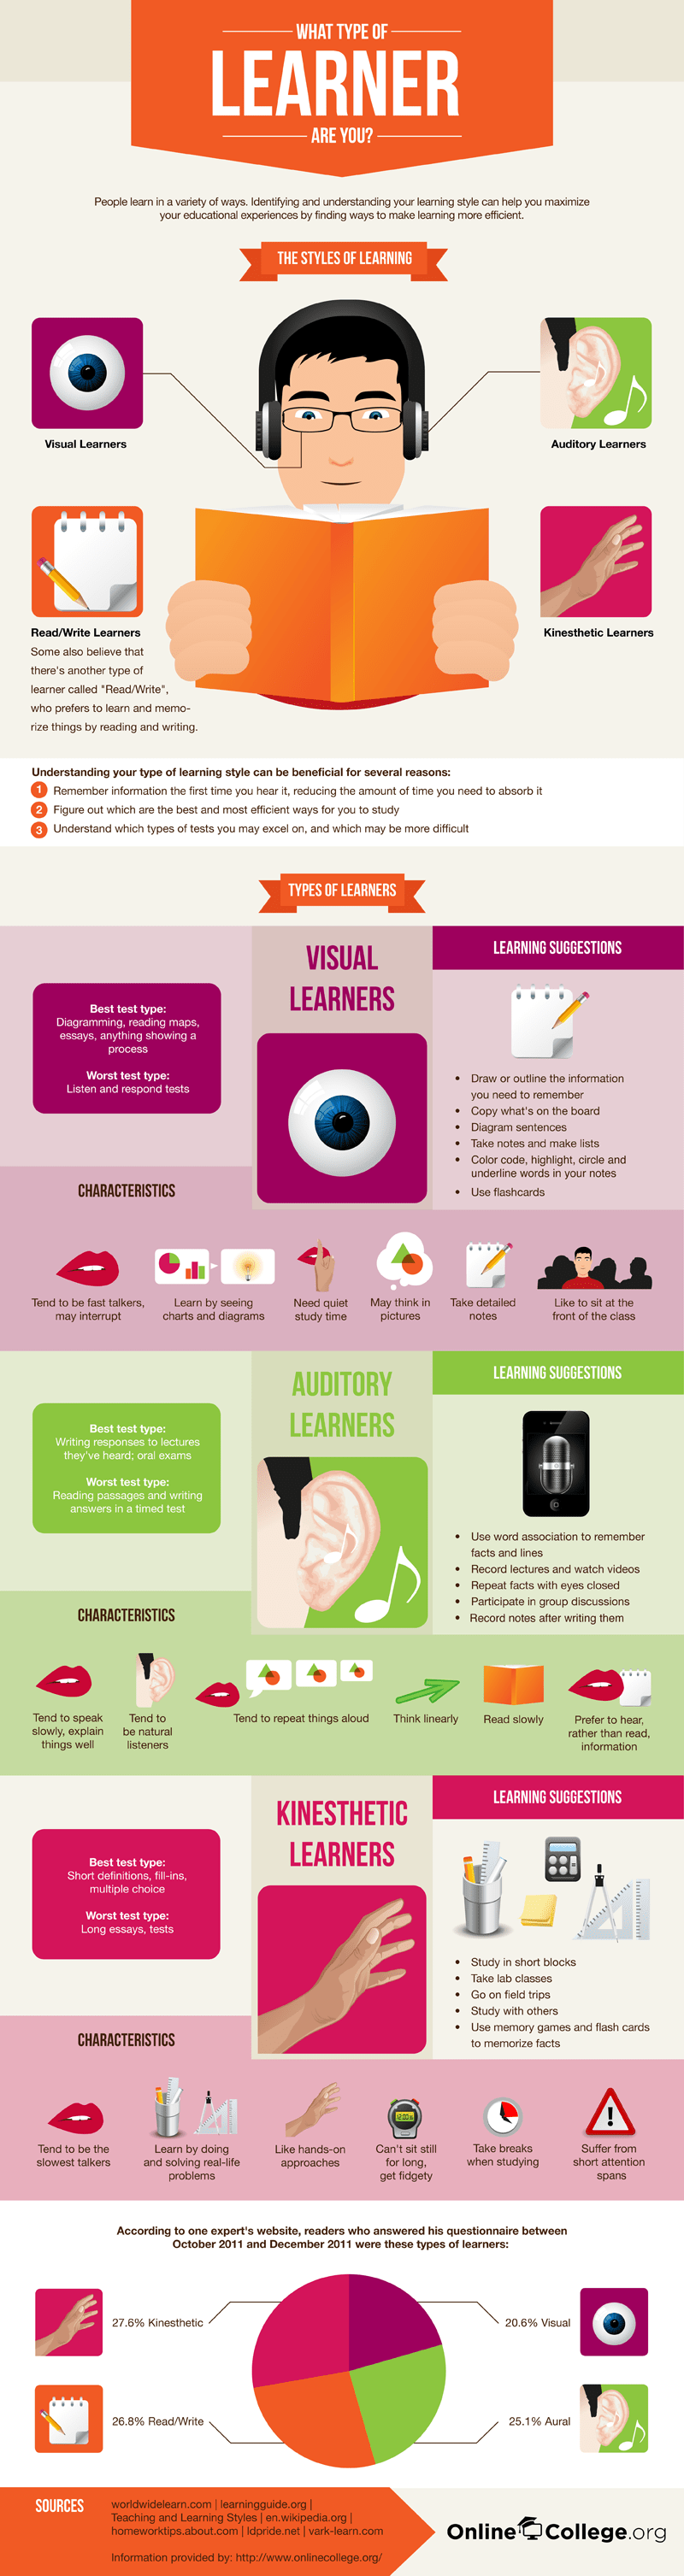 What Type of Learner are You?